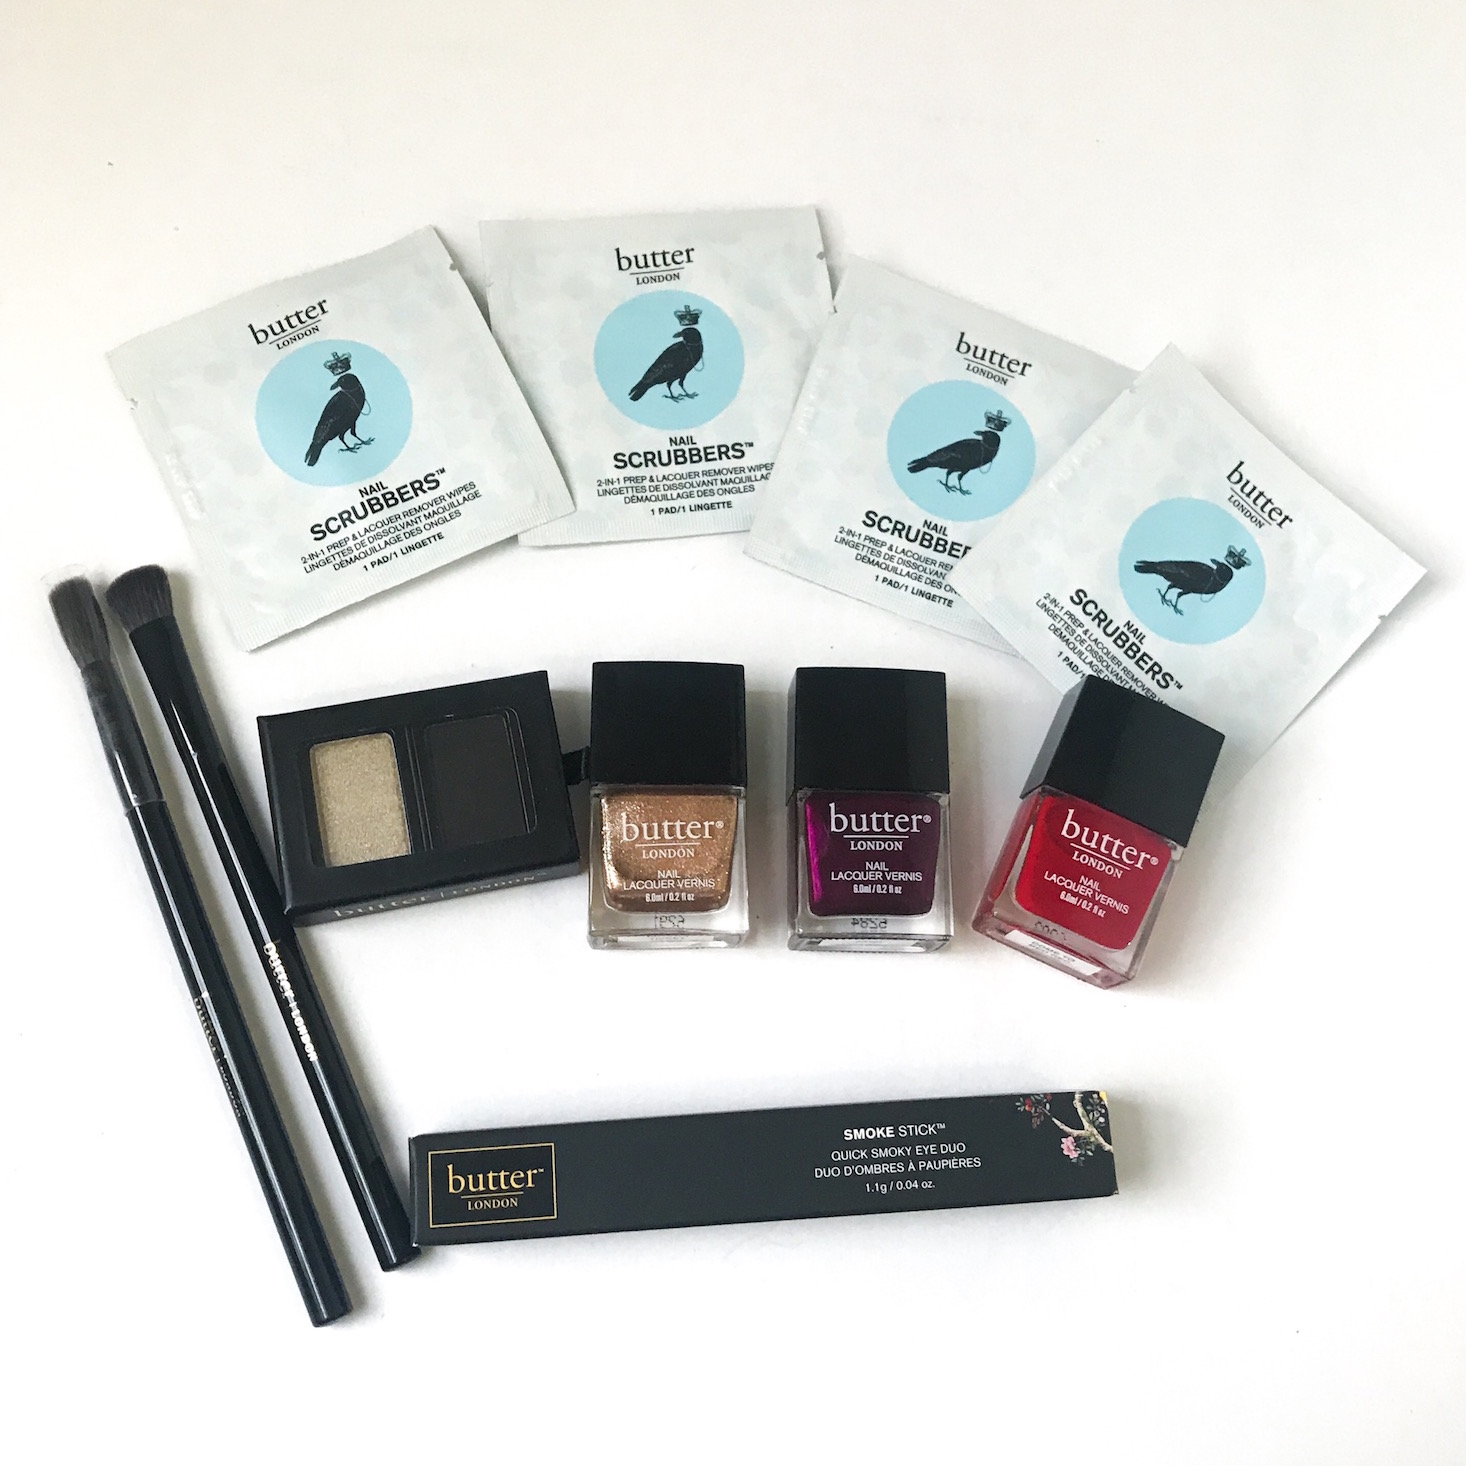 Butter London Mystery Holiday Bundle Review – November 2018